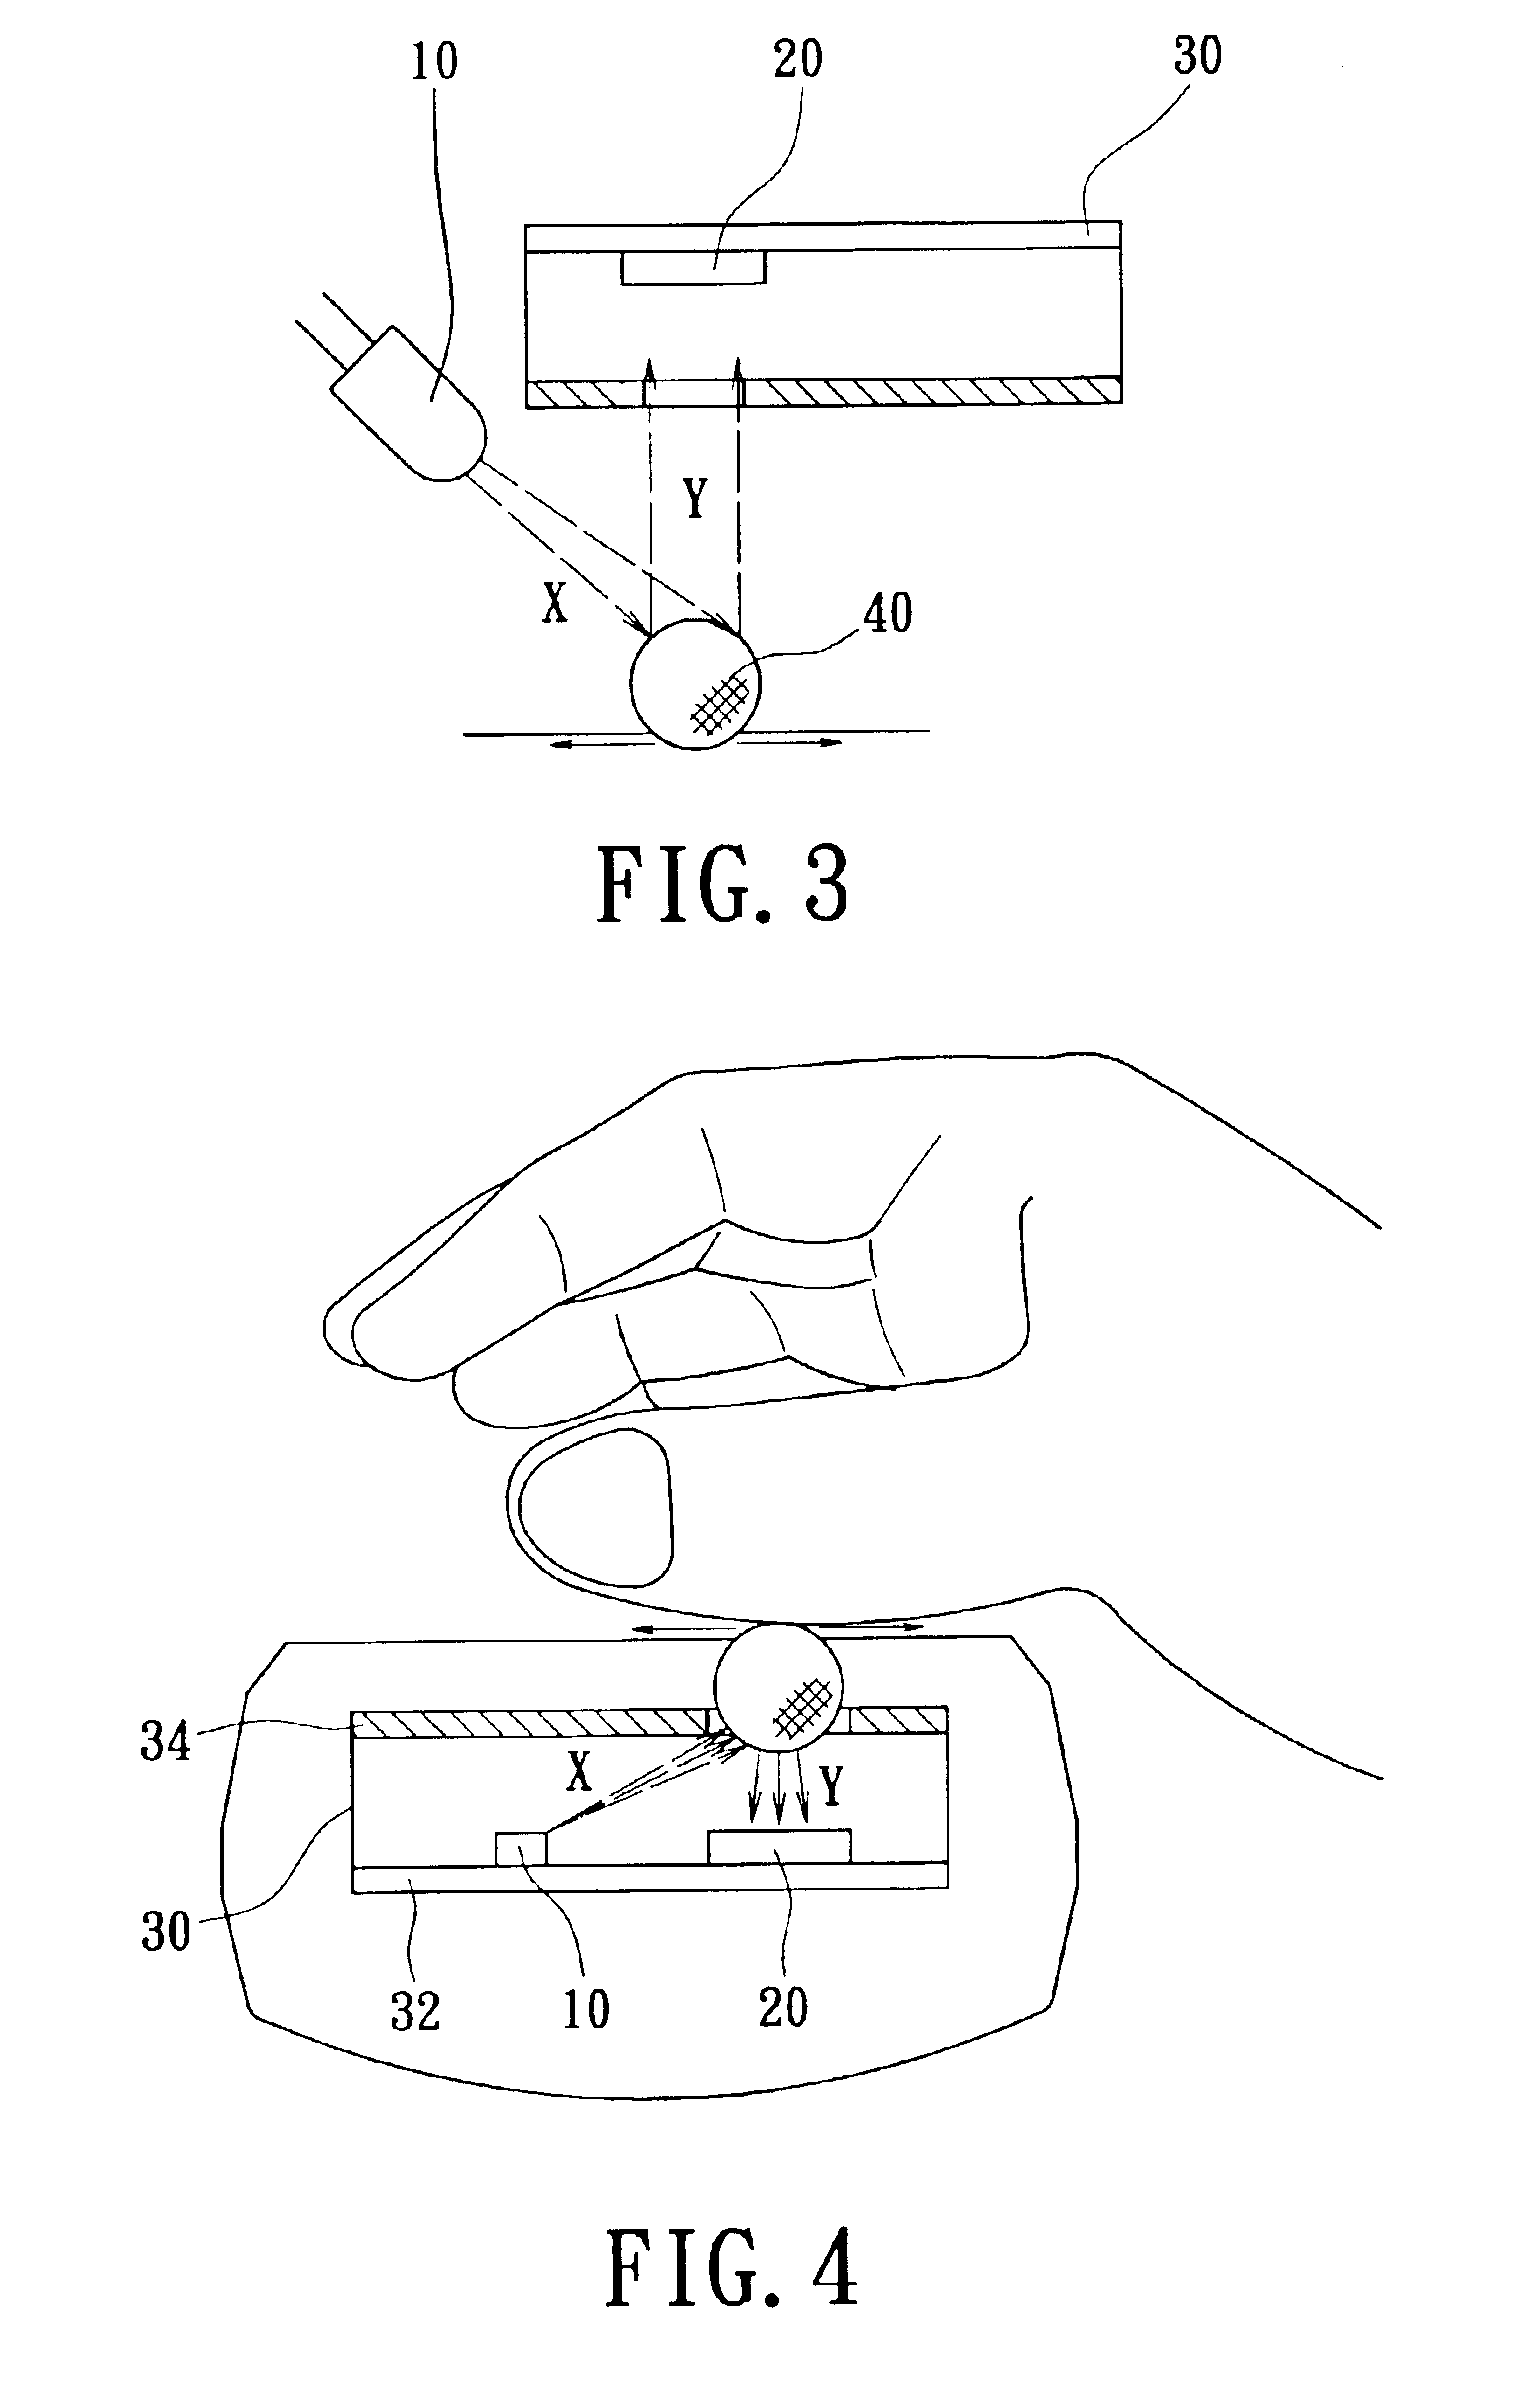 Optical mouse with rolling ball